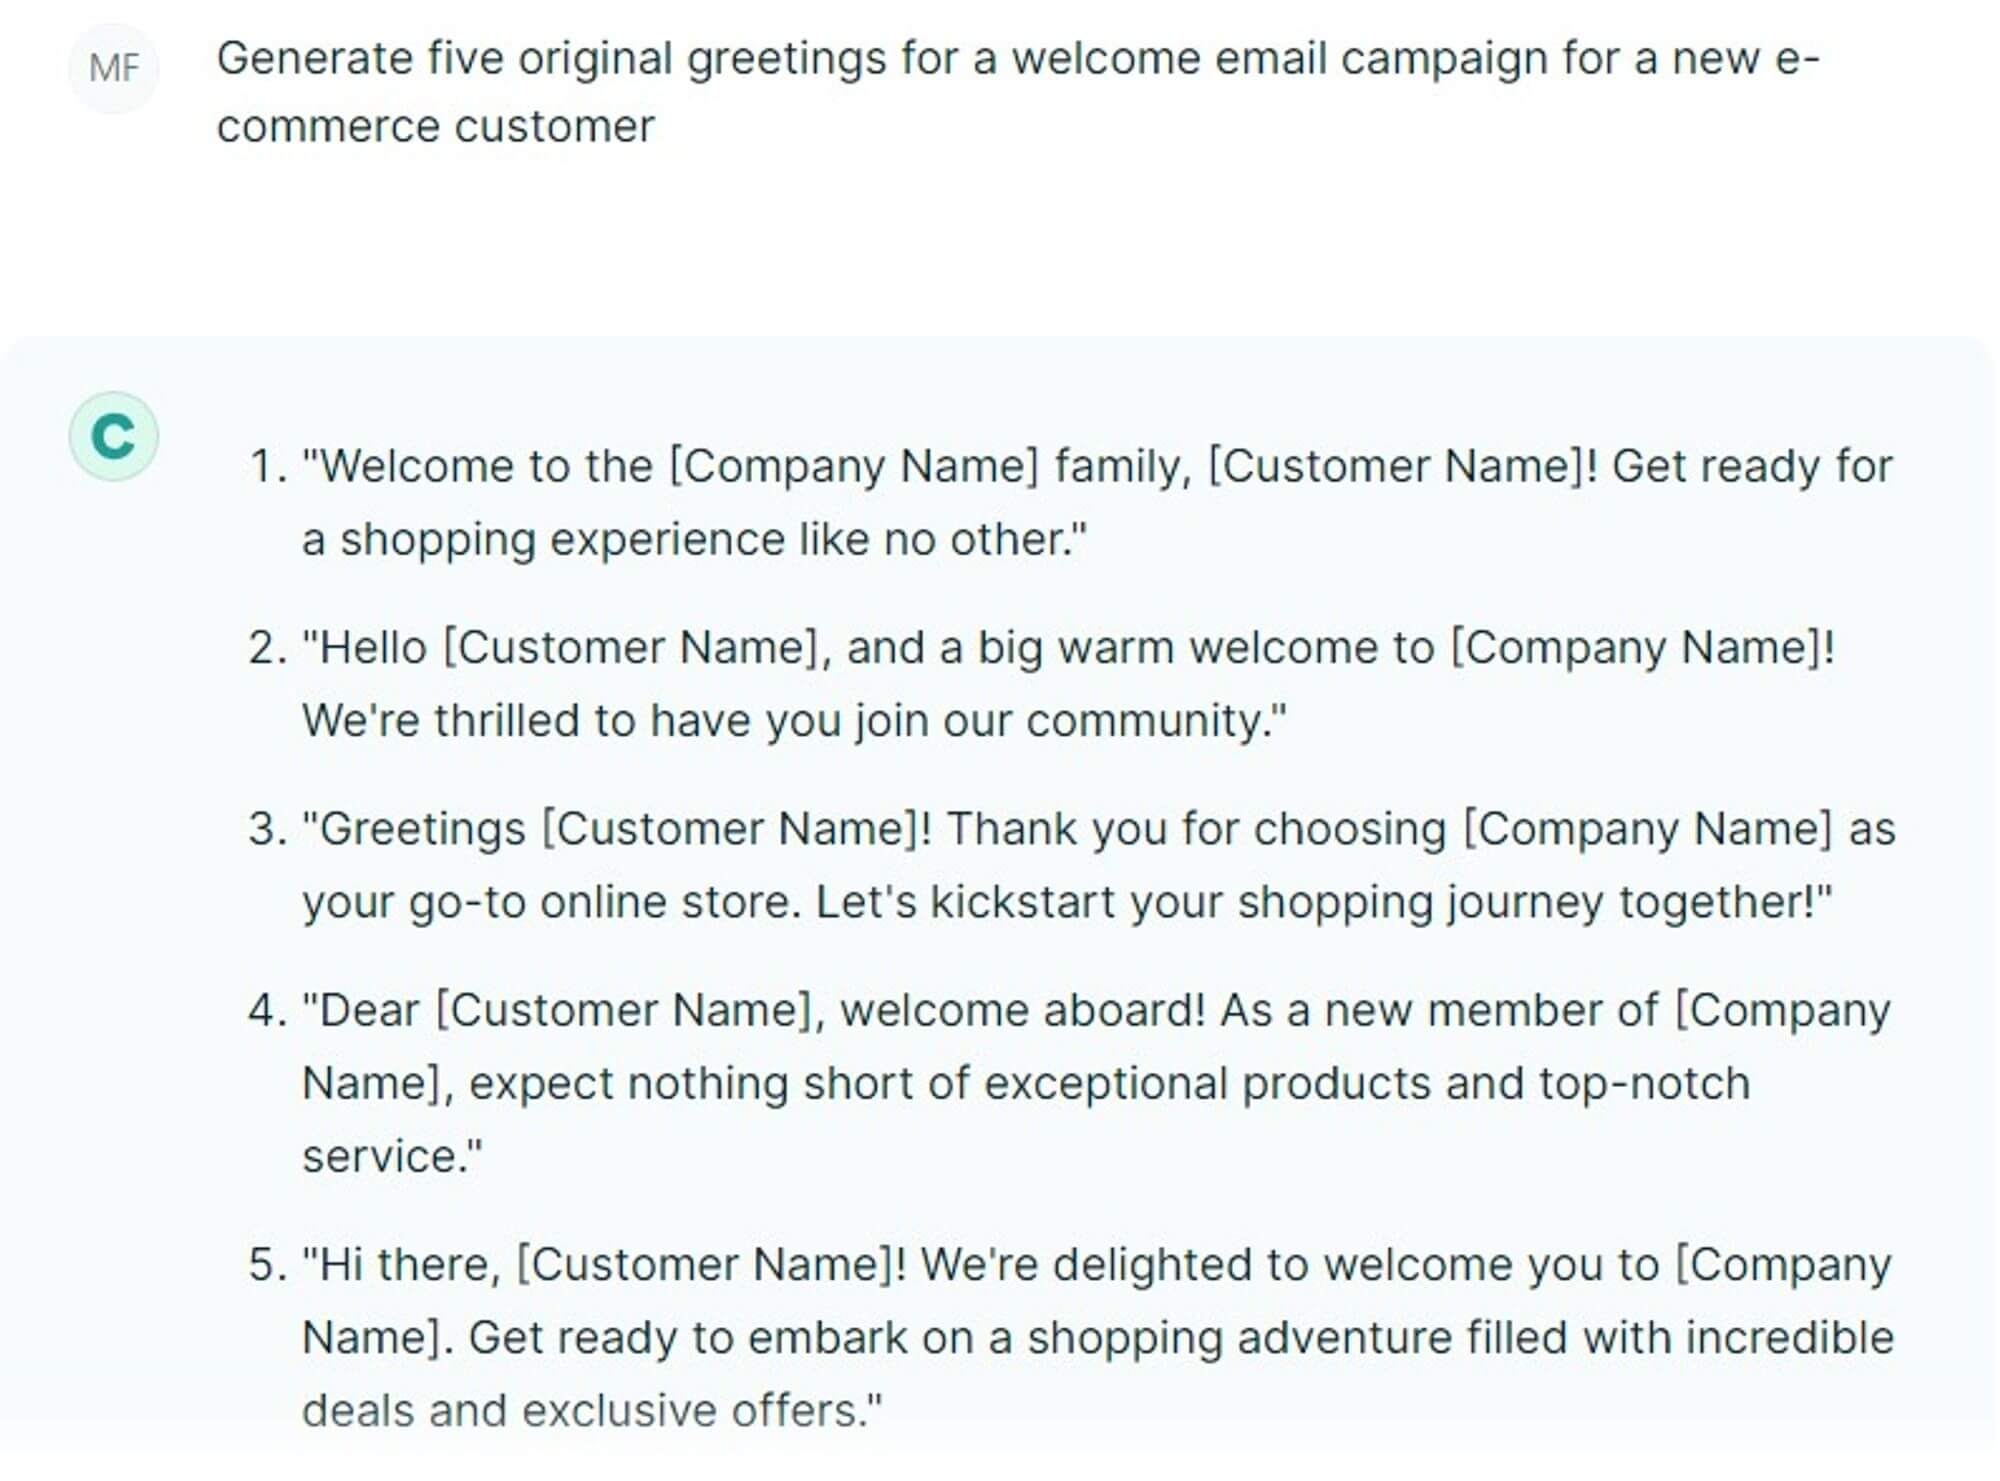 Welcome email templates for an ecommerce new customer